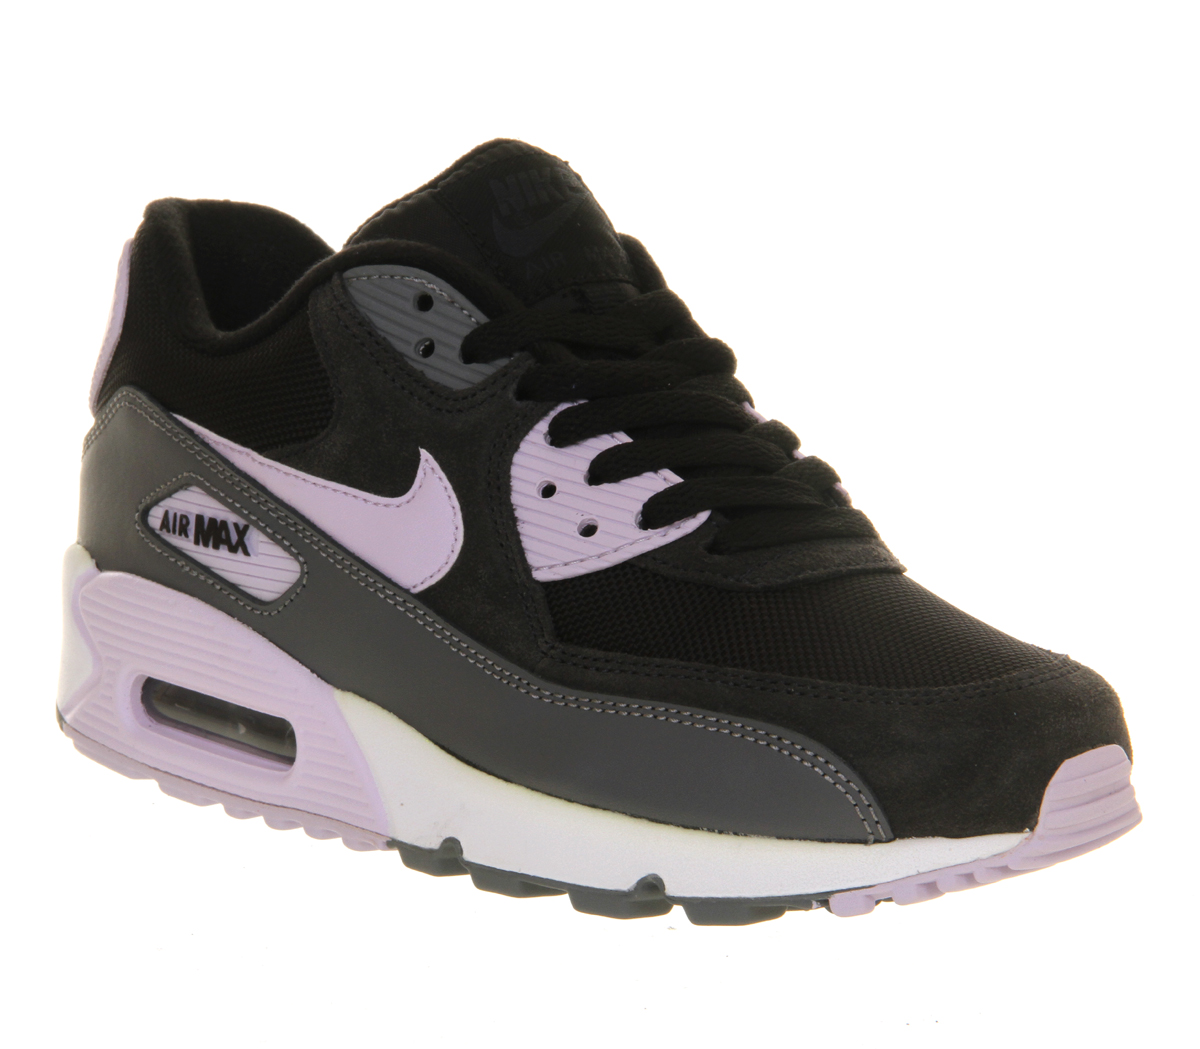 NikeAir Max 90Black Frost Anthracite Grey